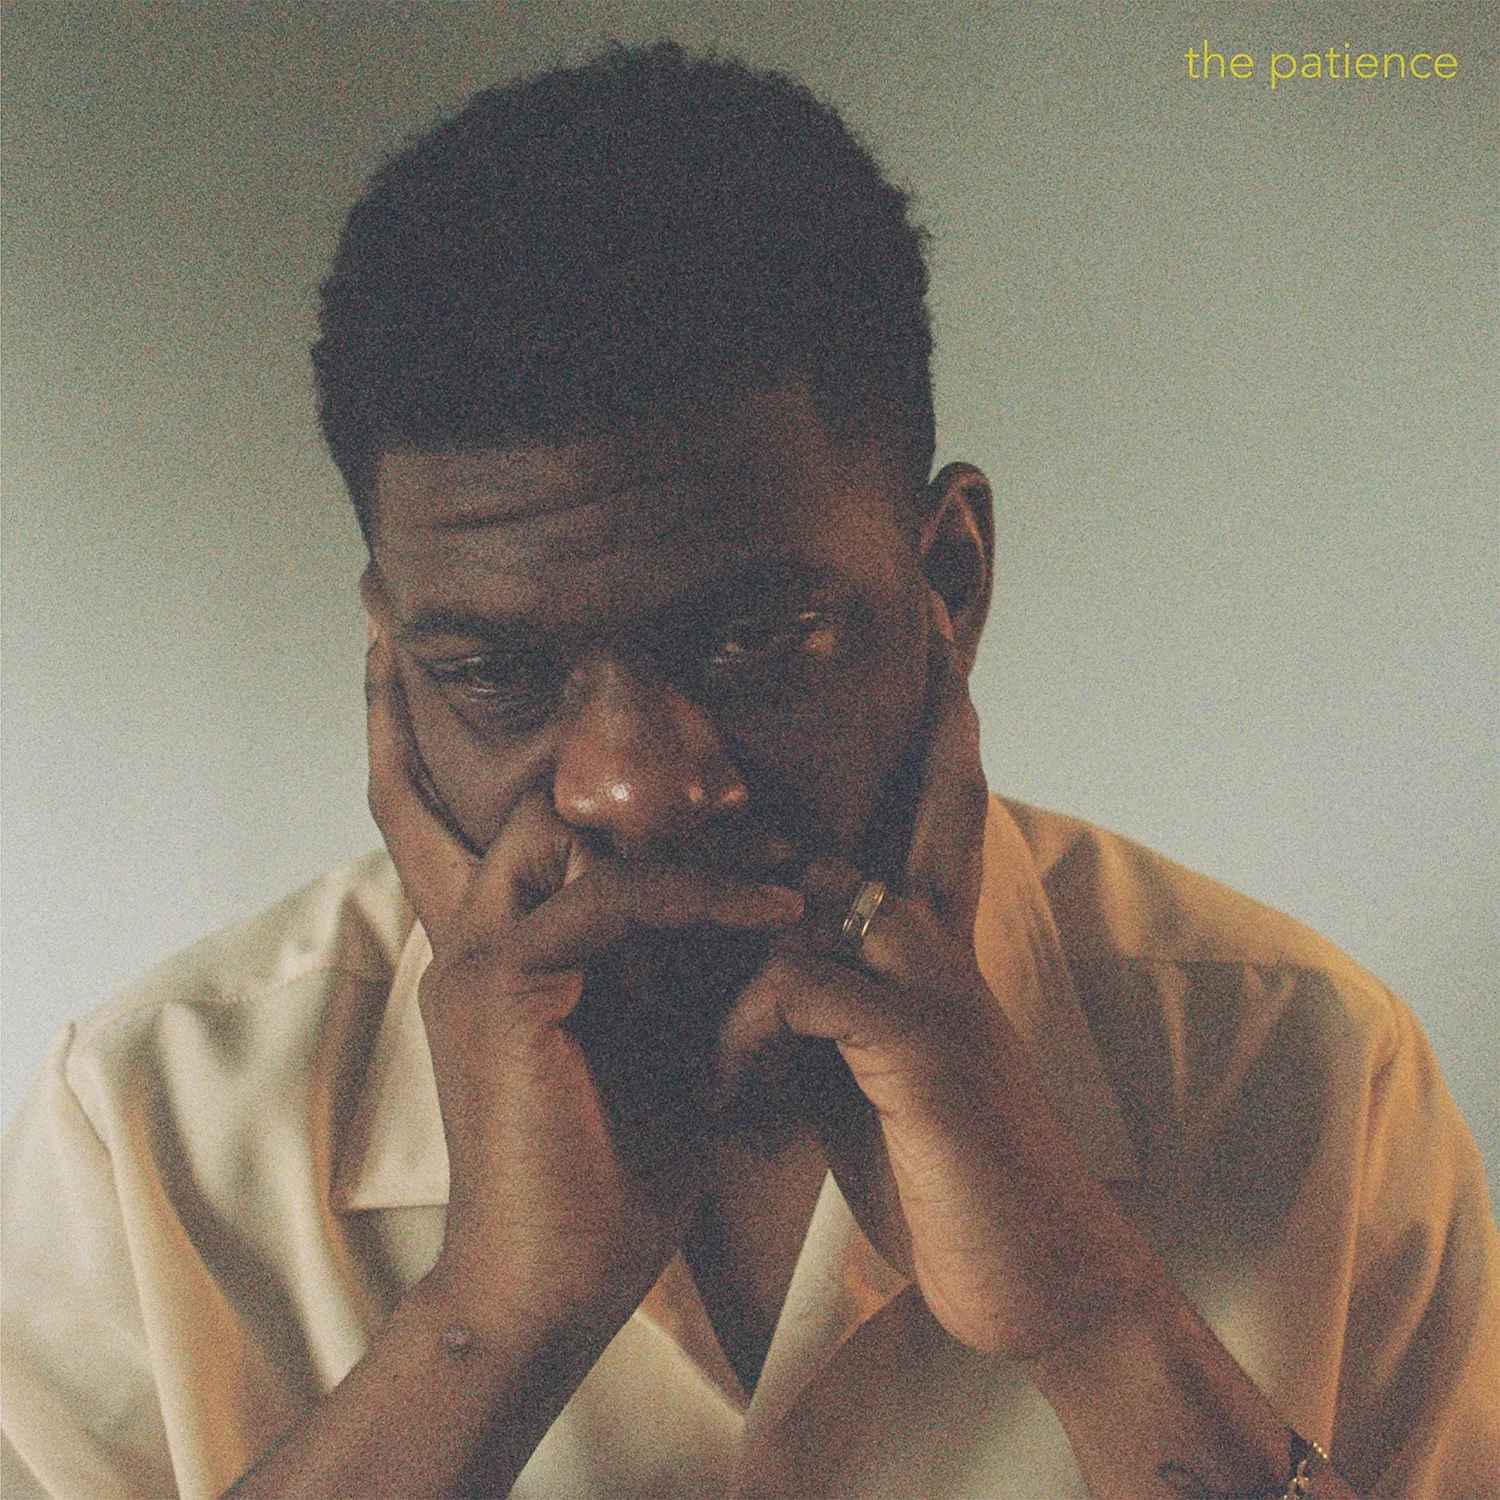 <strong>Mick Jenkins - The Patience</strong> (Vinyl LP - yellow)